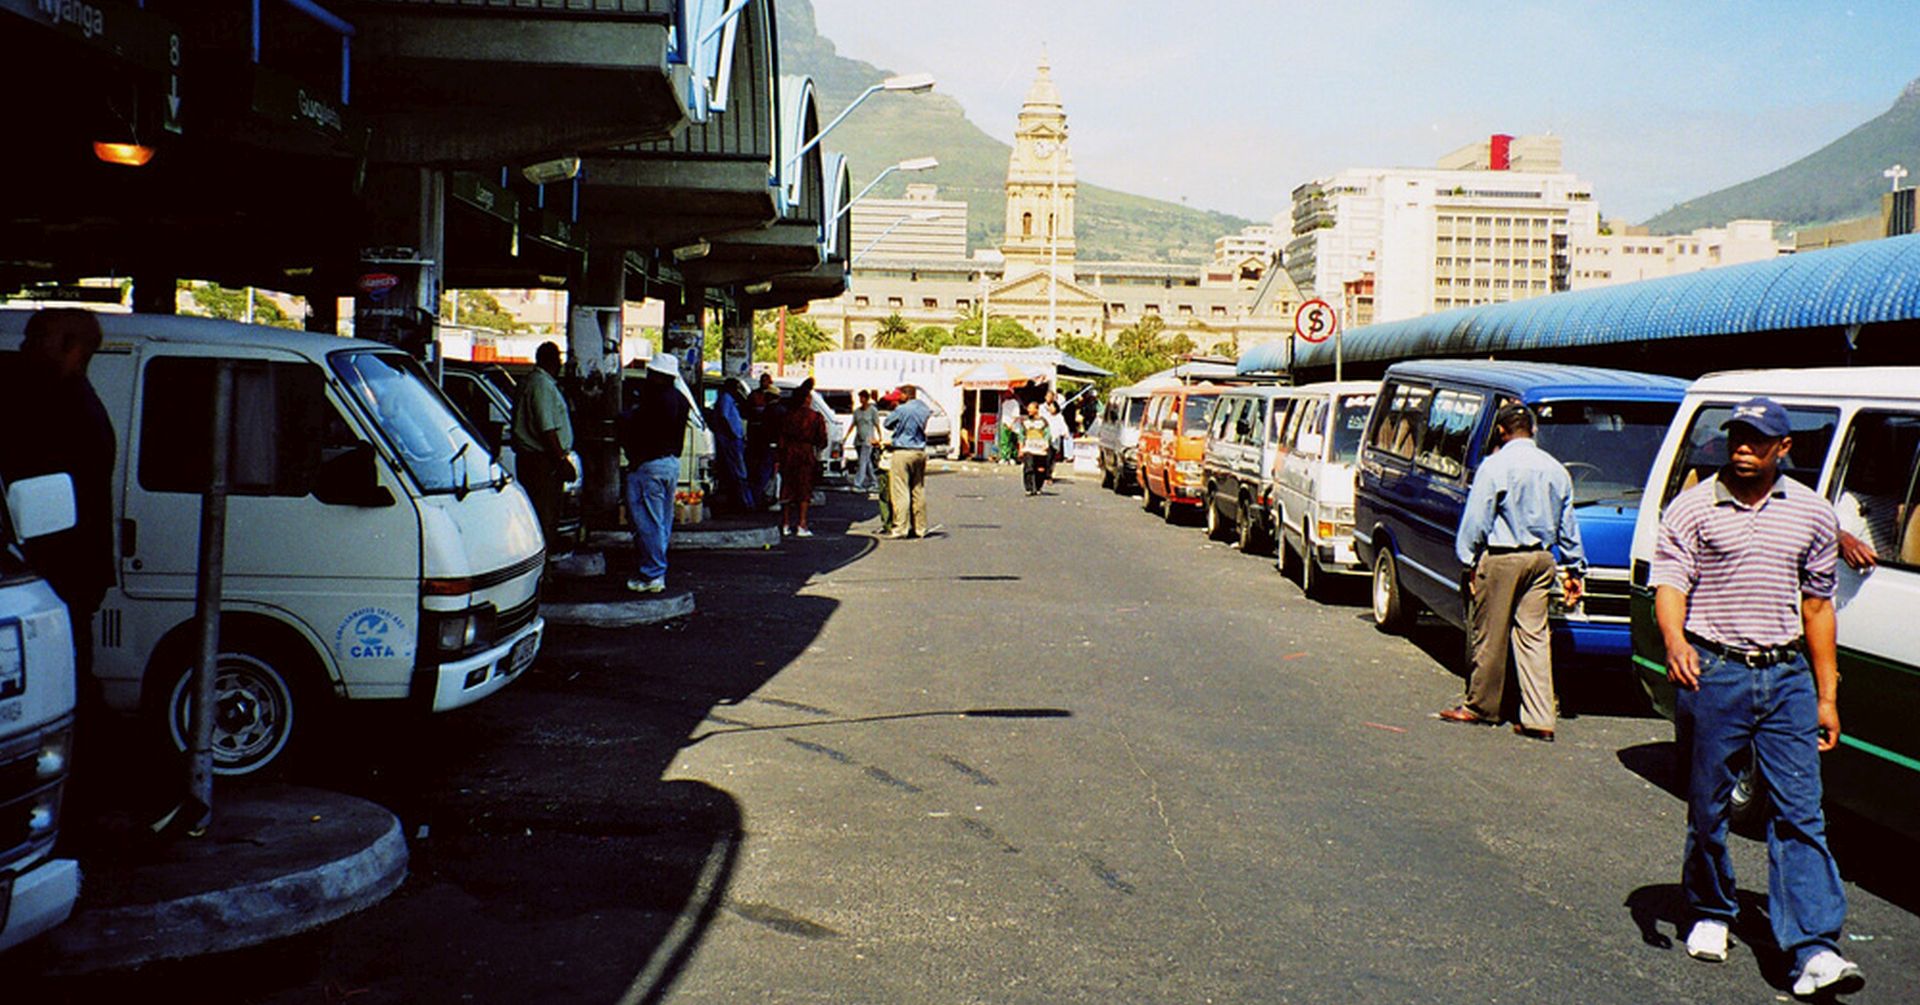 Taxi rank with view of Cape Town behind